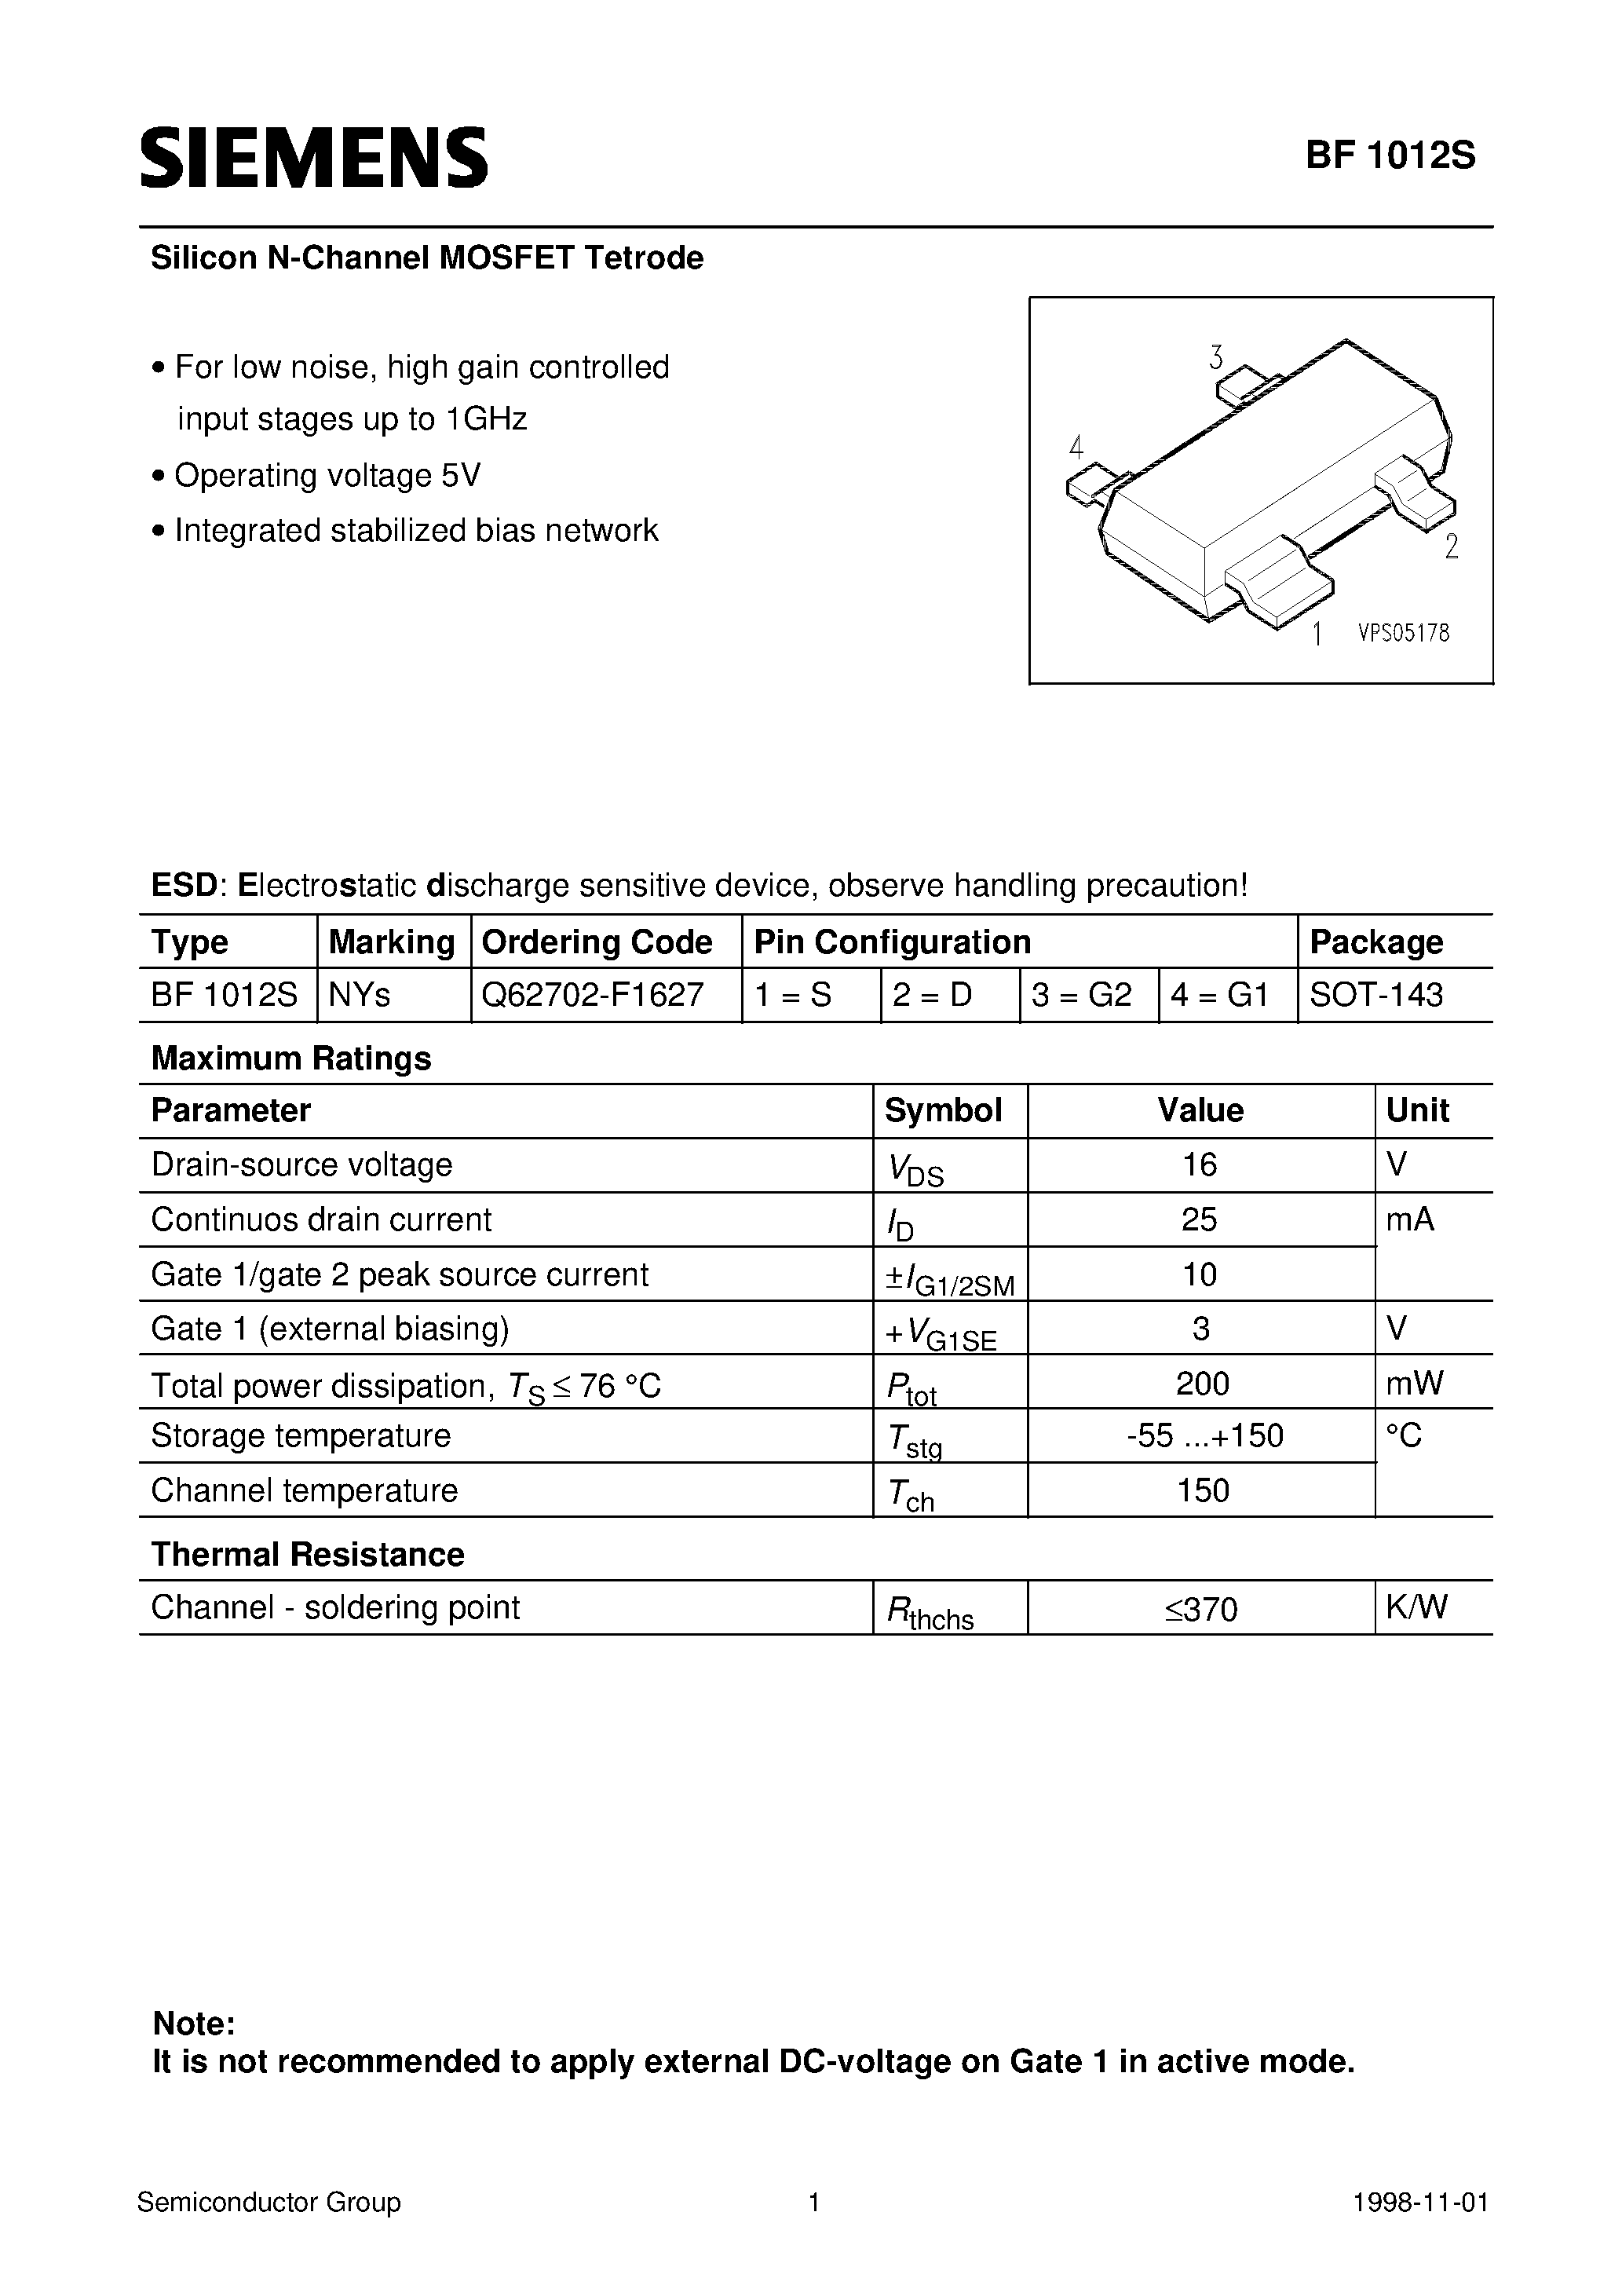 Datasheet BF1012S - Silicon N-Channel MOSFET Tetrode (For low noise/ high gain controlled input stages up to 1GHz Operating voltage 5V Integrated stabilized bias network) page 1